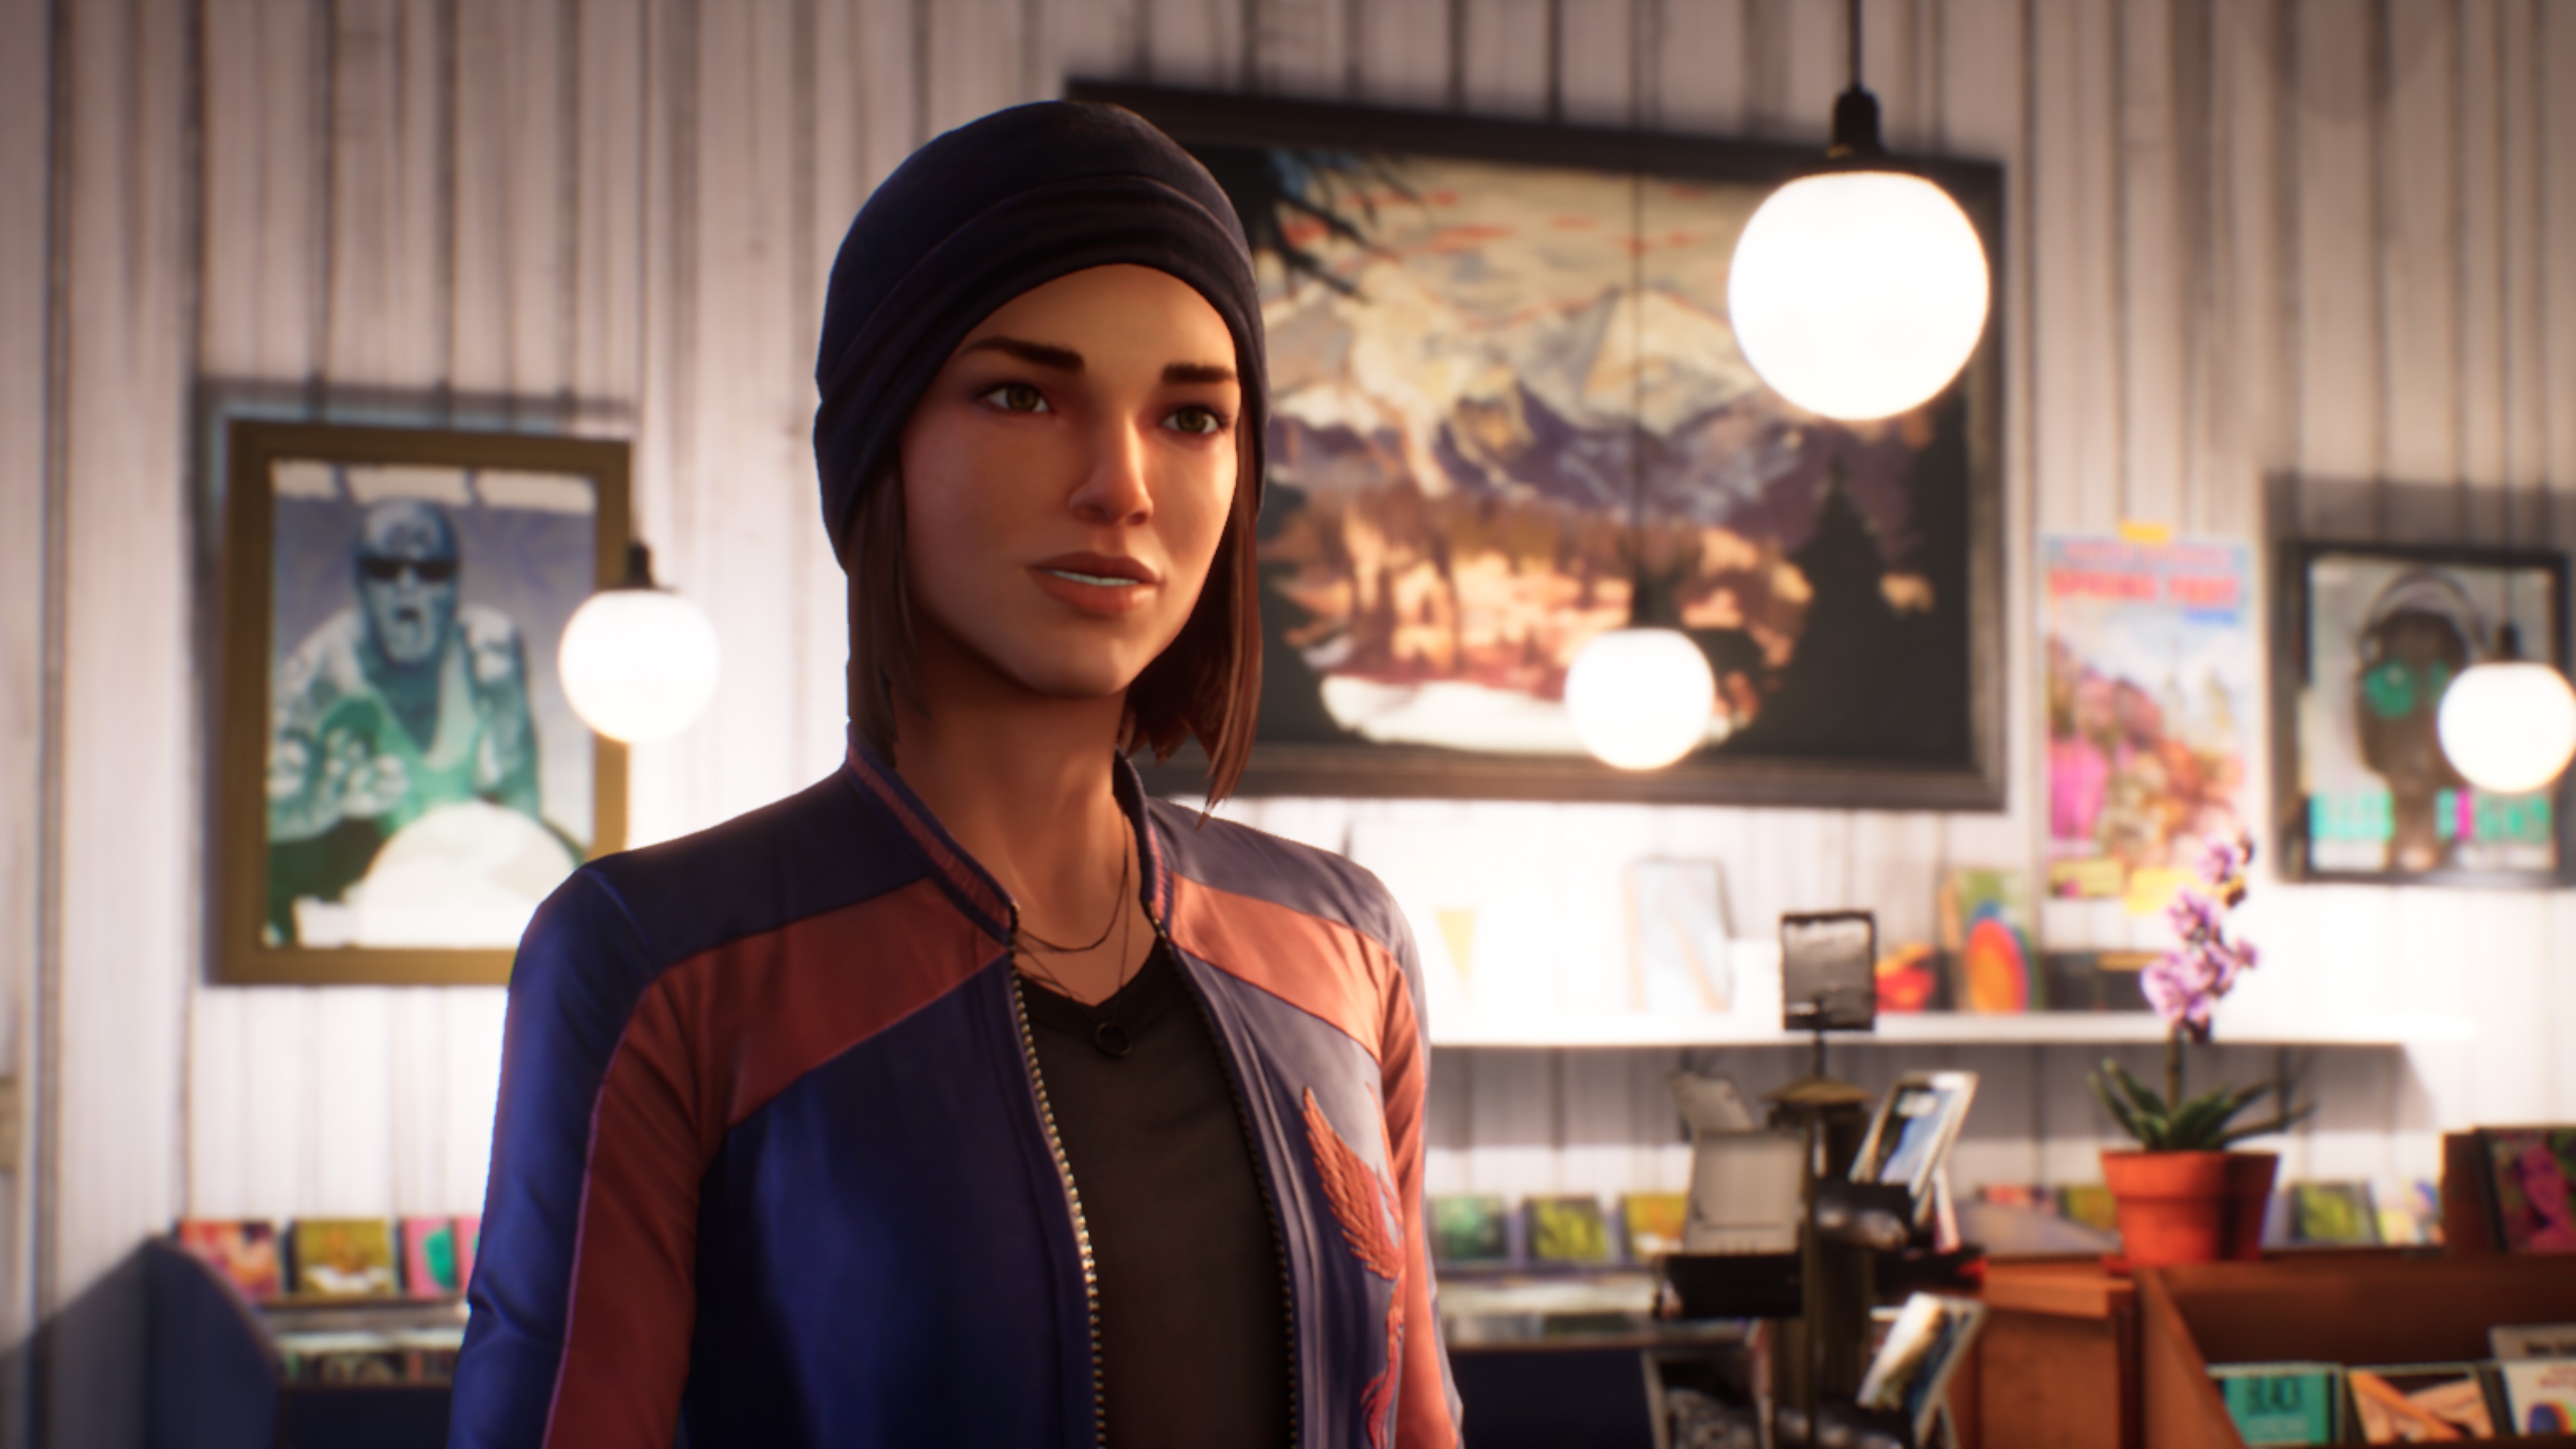 Life is Strange: True Colors Wavelengths screenshot showing the main character Steph Gingrich